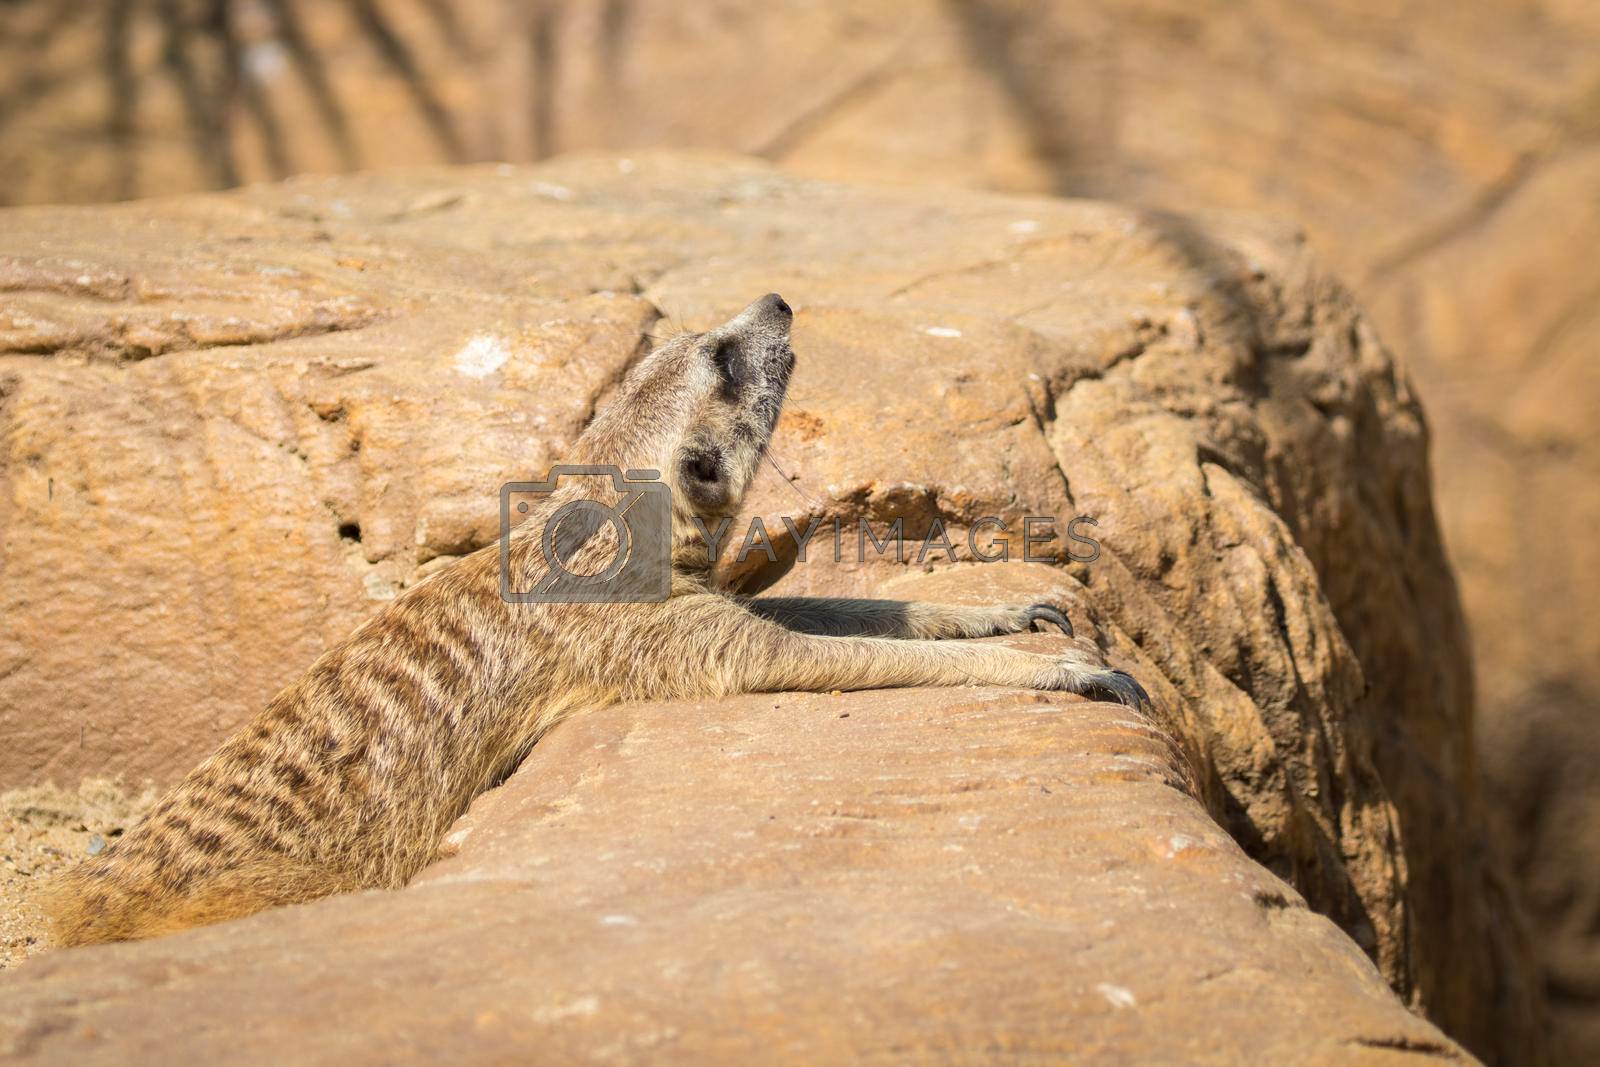 Royalty free image of Image of a meerkat or suricate on nature background. Wild Animals. by yod67